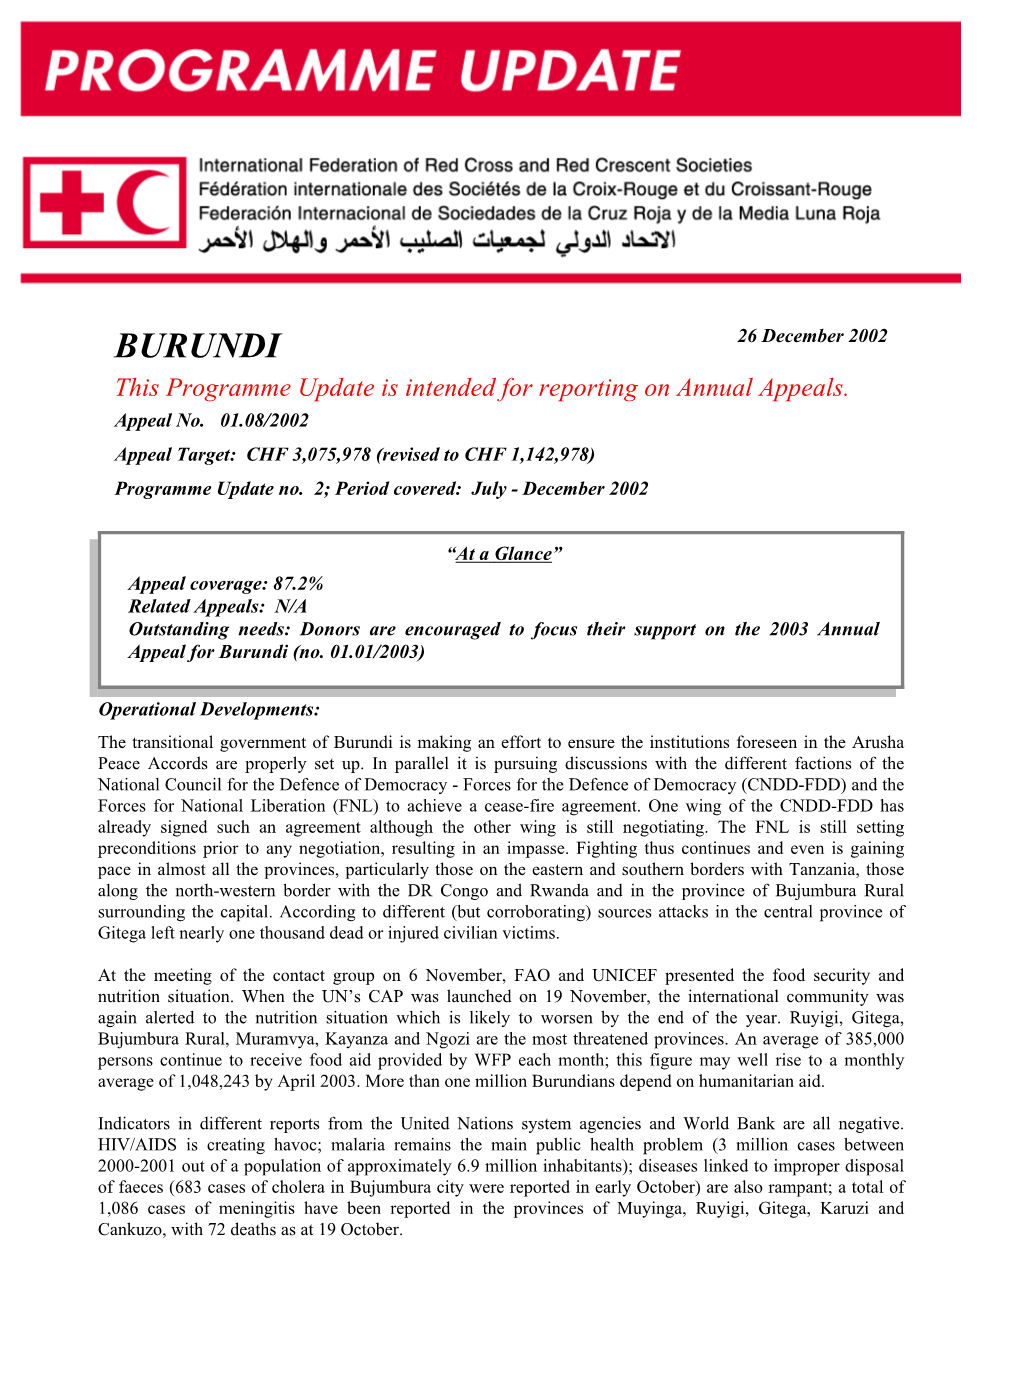 BURUNDI 26 December 2002 This Programme Update Is Intended for Reporting on Annual Appeals